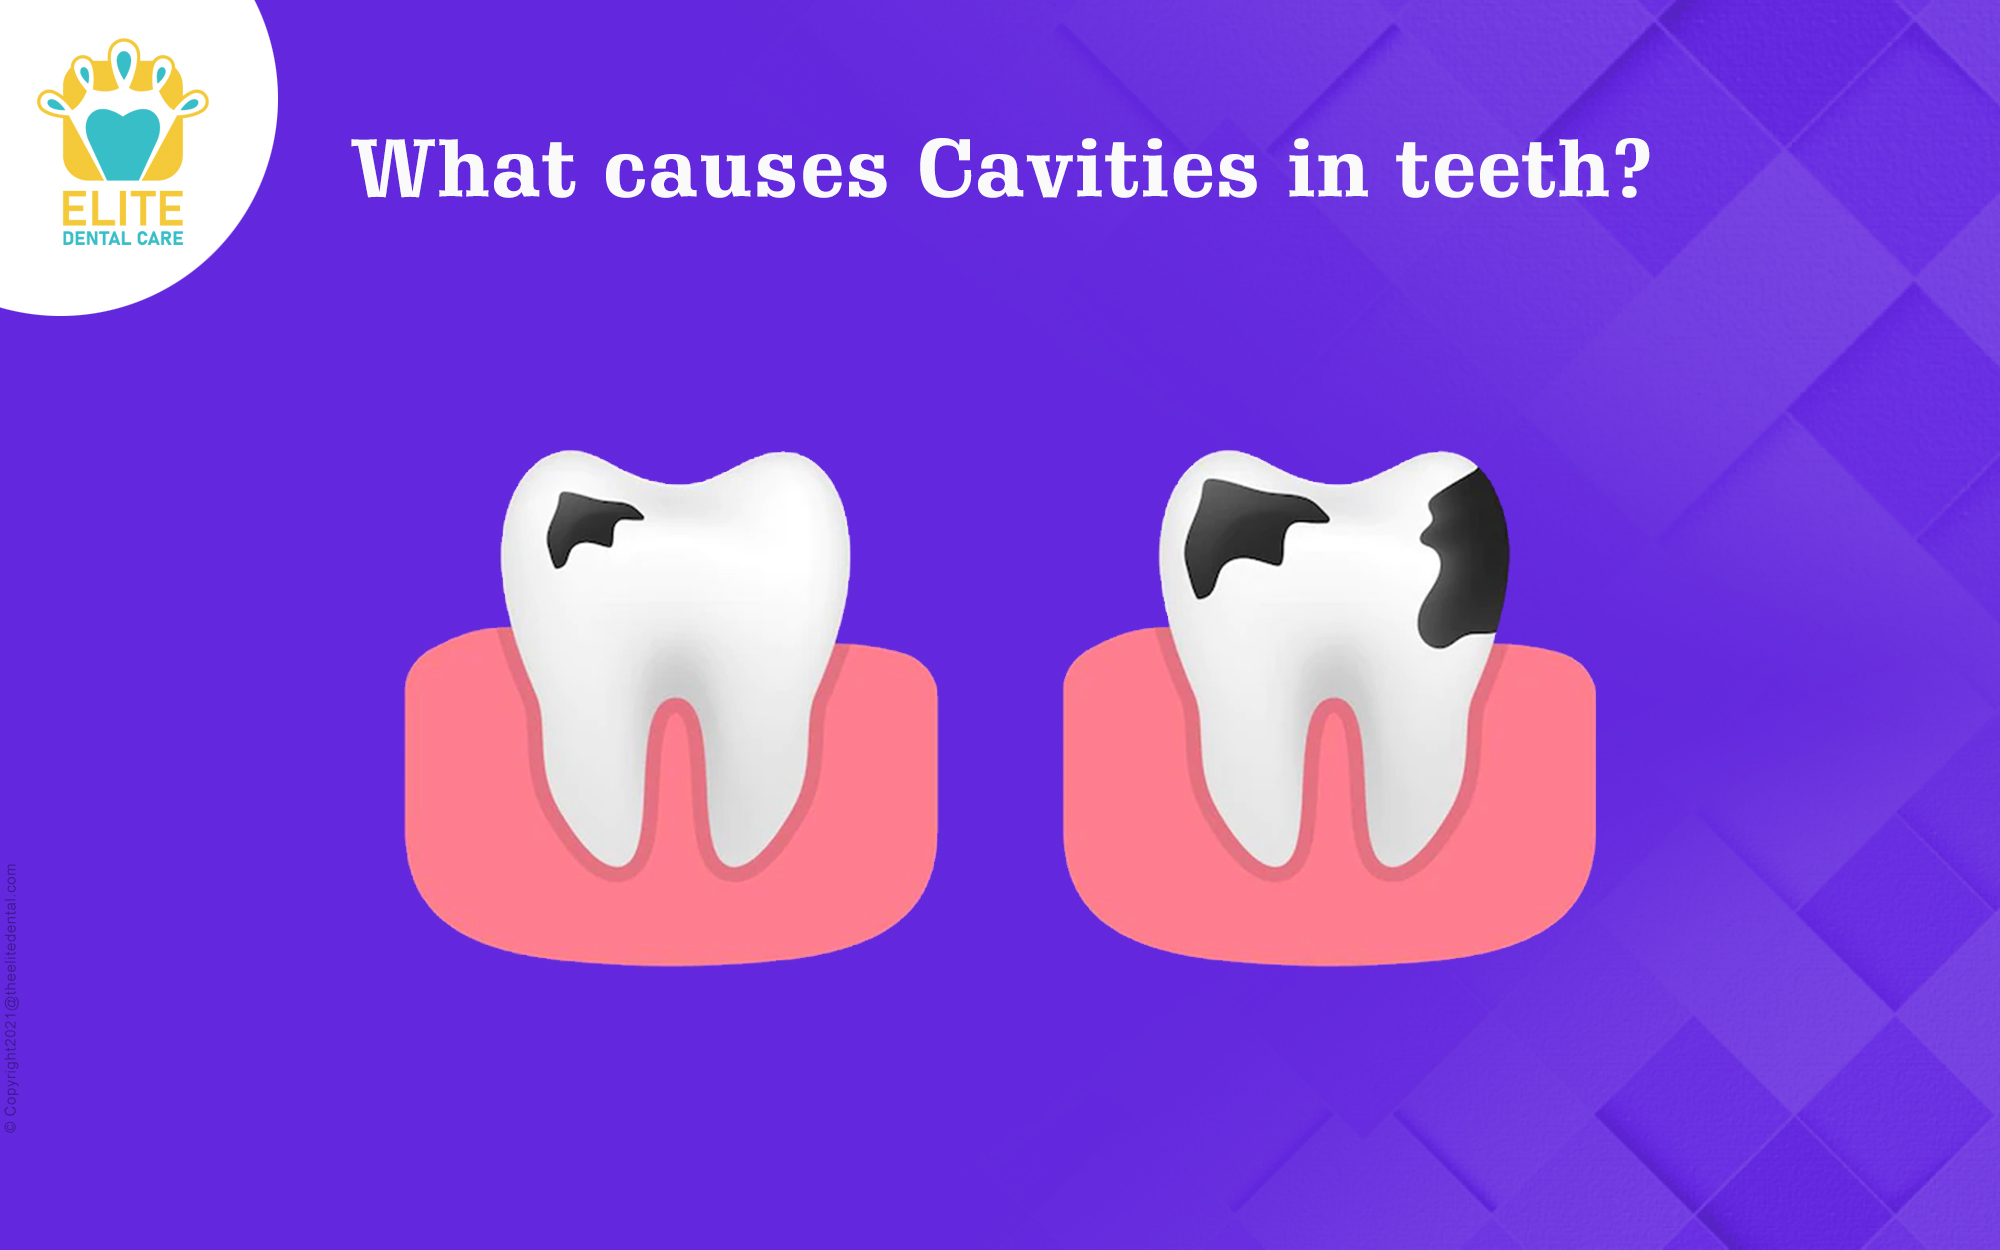 What Causes Caries in Teeth?